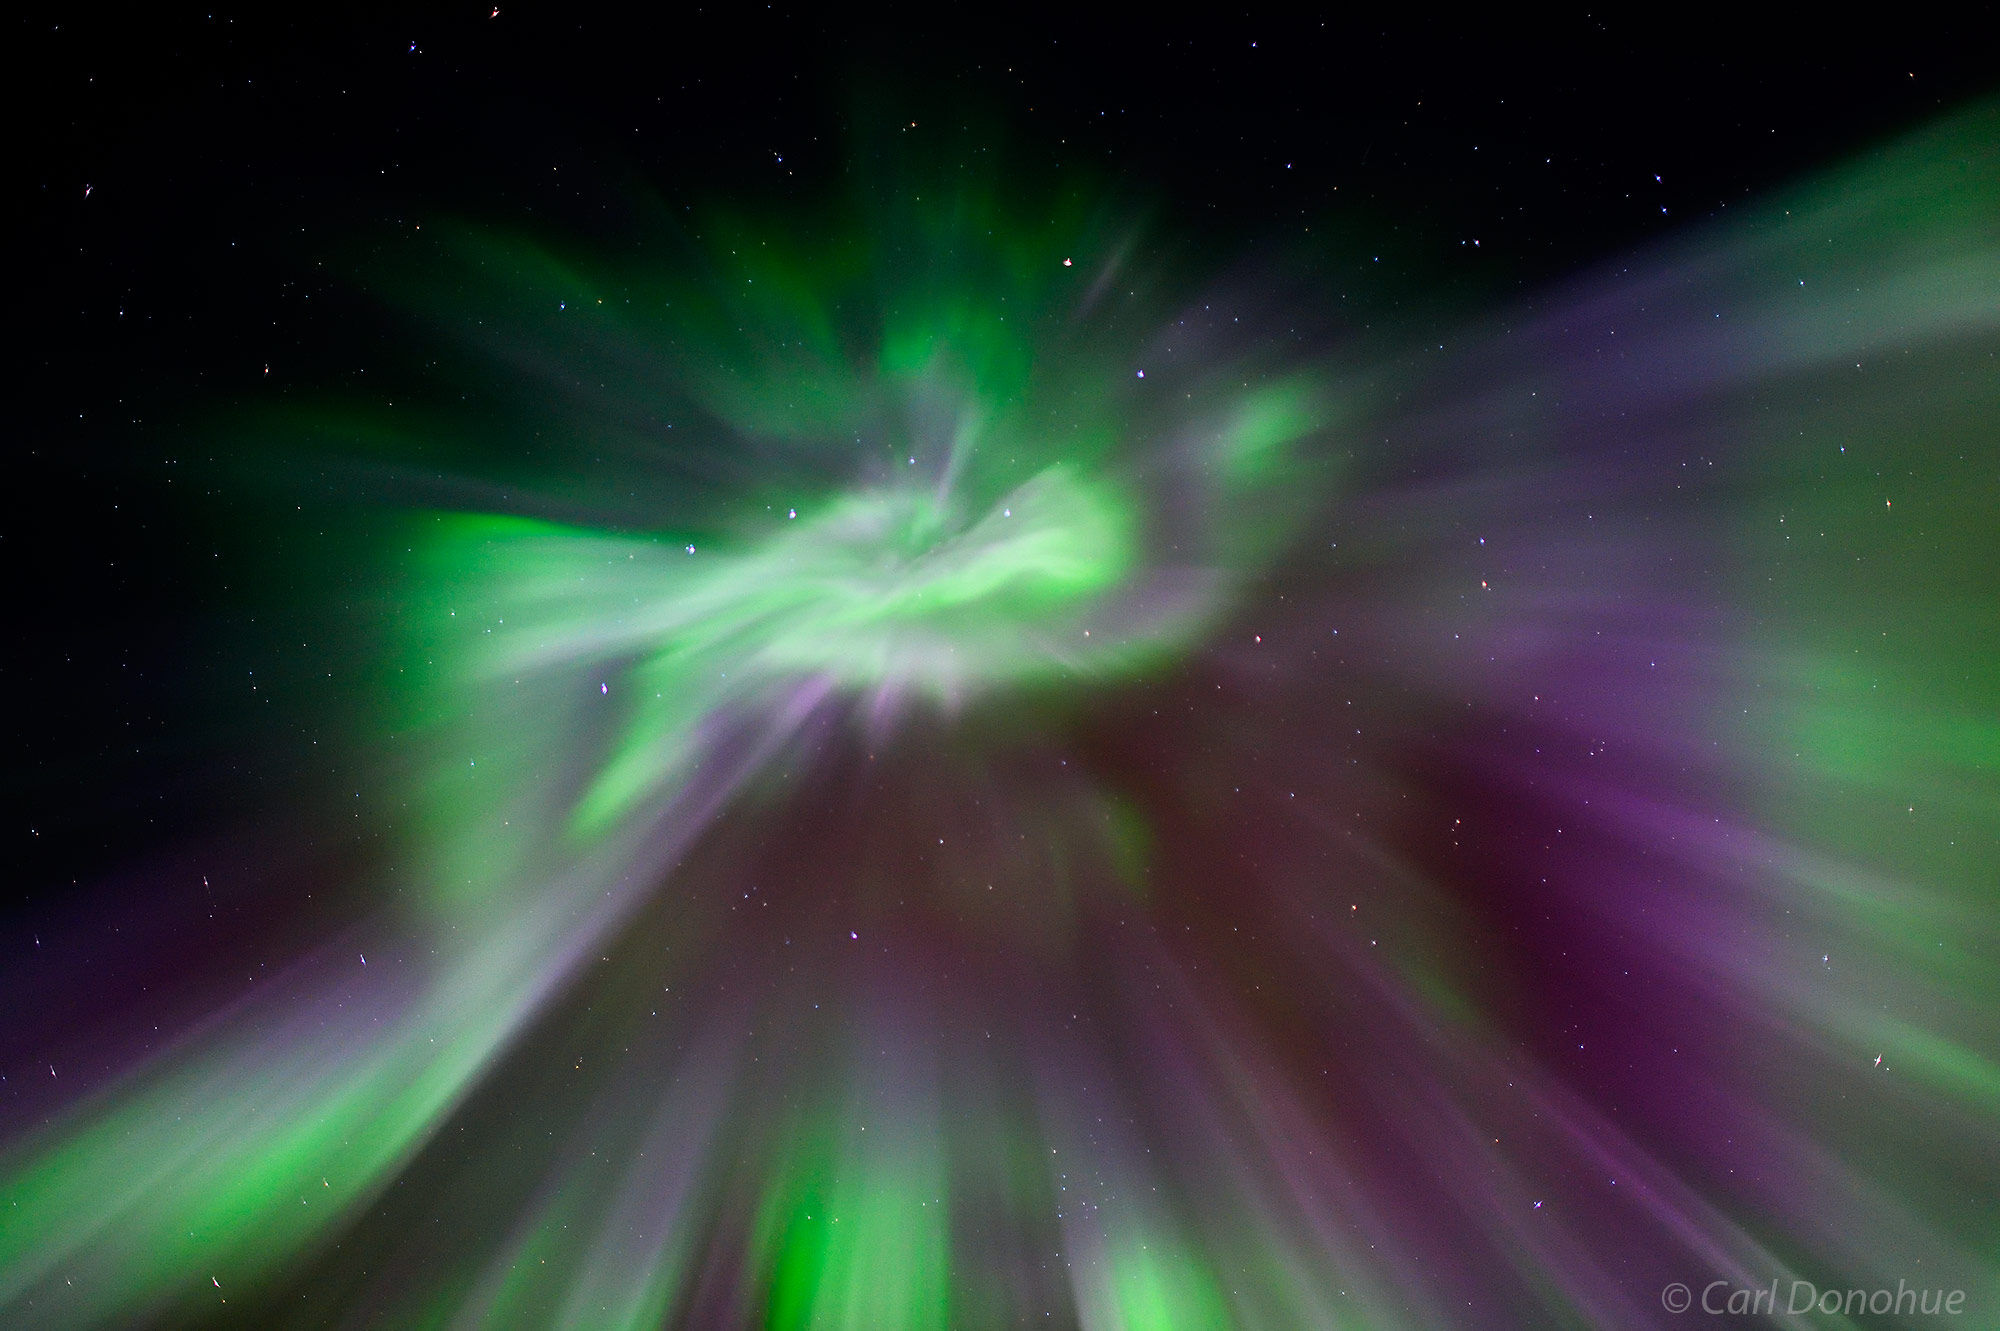 The auroral corona. Purple and green here, took my breath away as I stood transfixed and photographing this classic Aurora borealis...